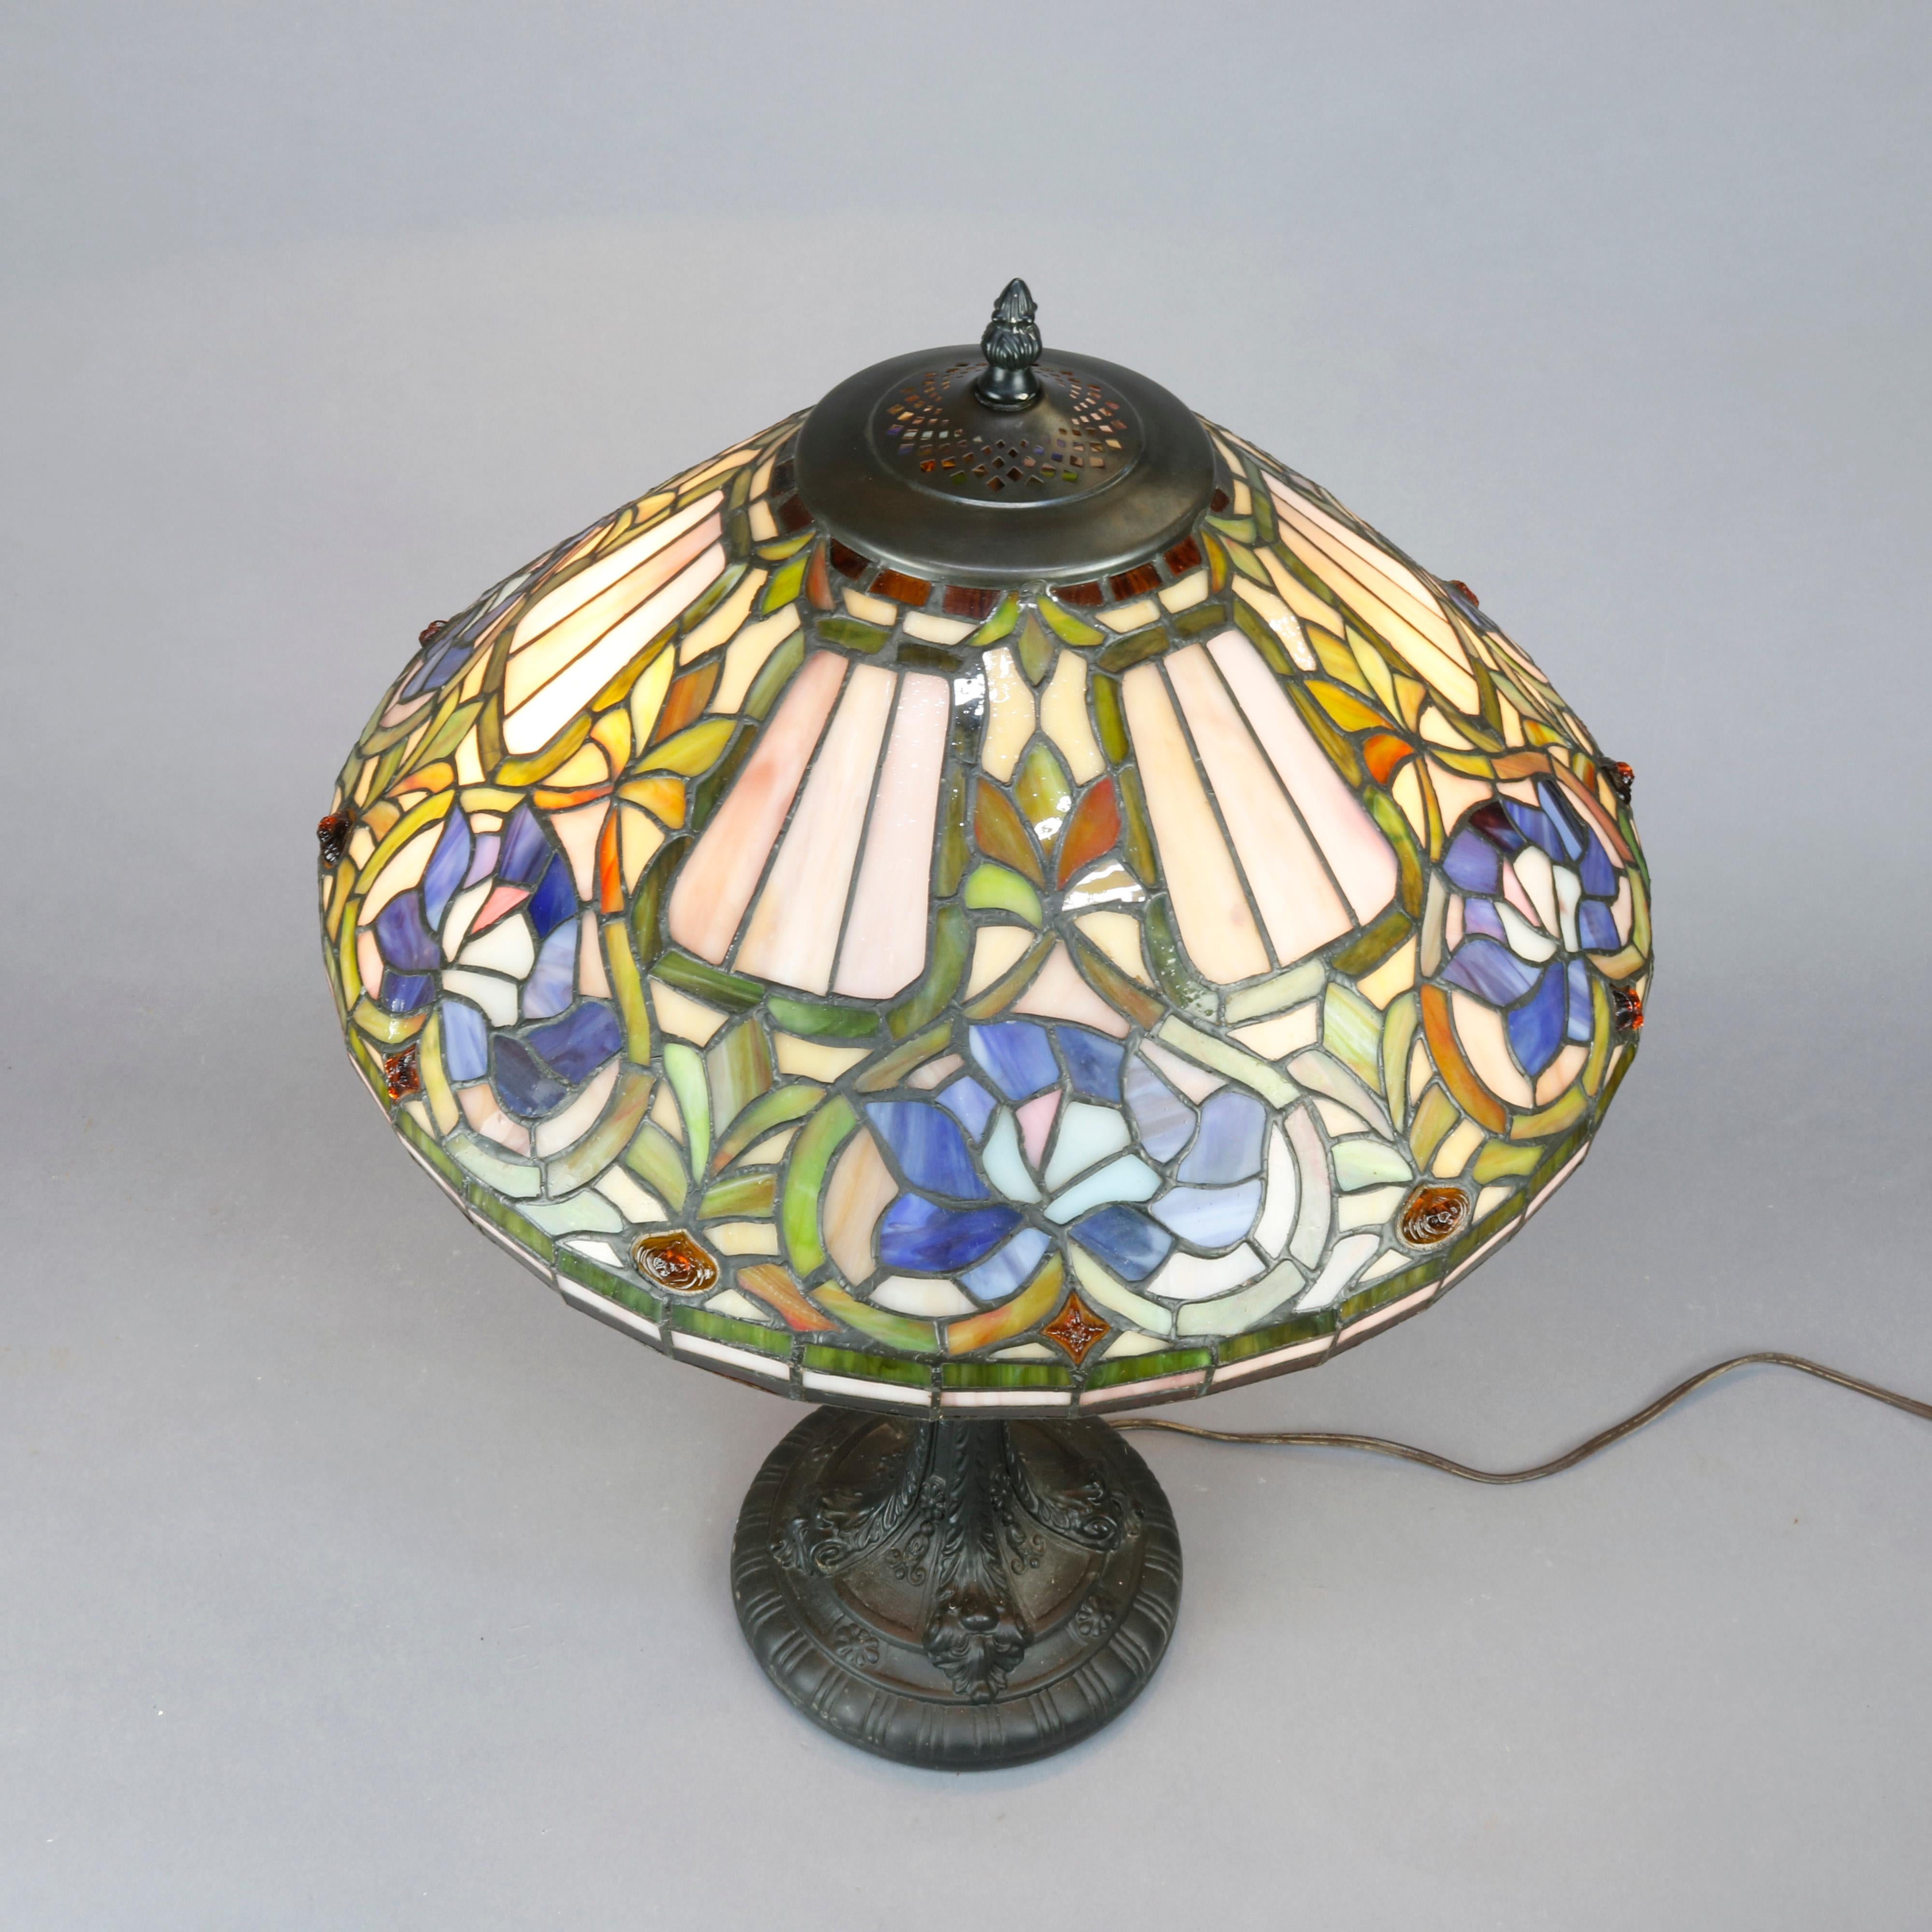 An antique Arts & Crafts table lamp in the manner of Tiffany Studios offers leaded slag and stained glass shade having stylized floral design with molded glass jewels surmounting foliate double cast double socket base, 20th century.

Measures: 26